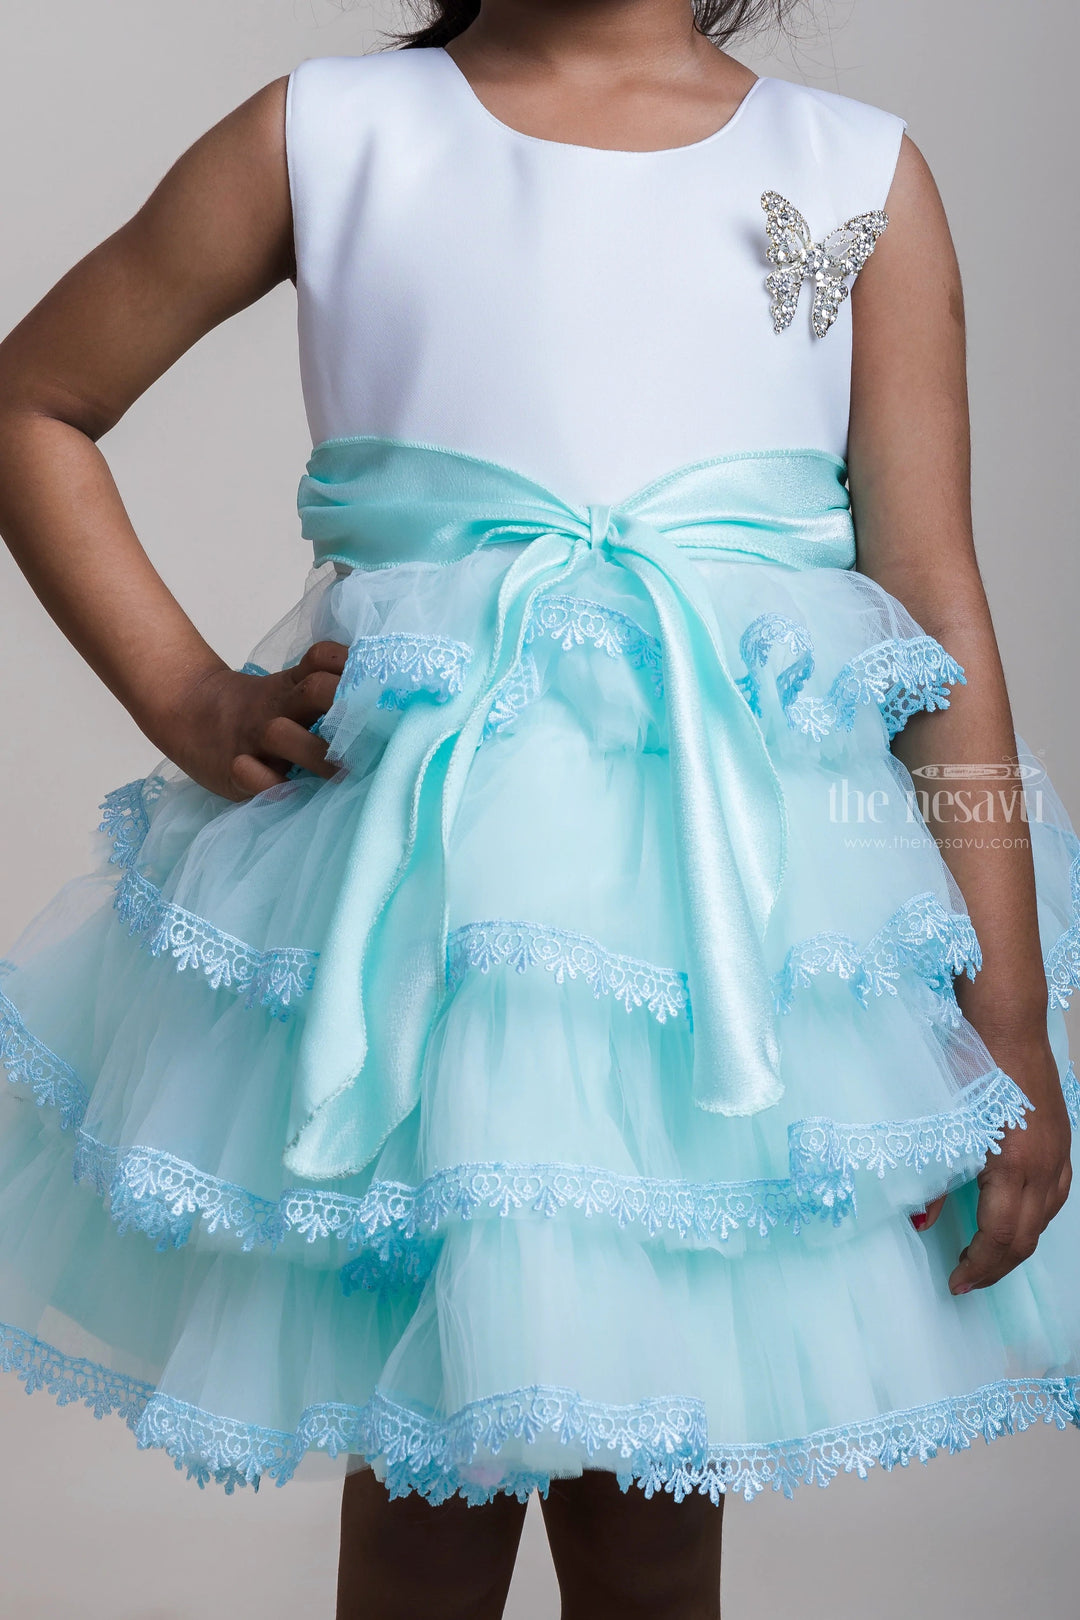 The Nesavu Party Frock Layered Blue Party Net Gown With Lace Embellishments For Girls Nesavu Blue Party Net Frocks For Girls | Festive Collection| The Nesavu